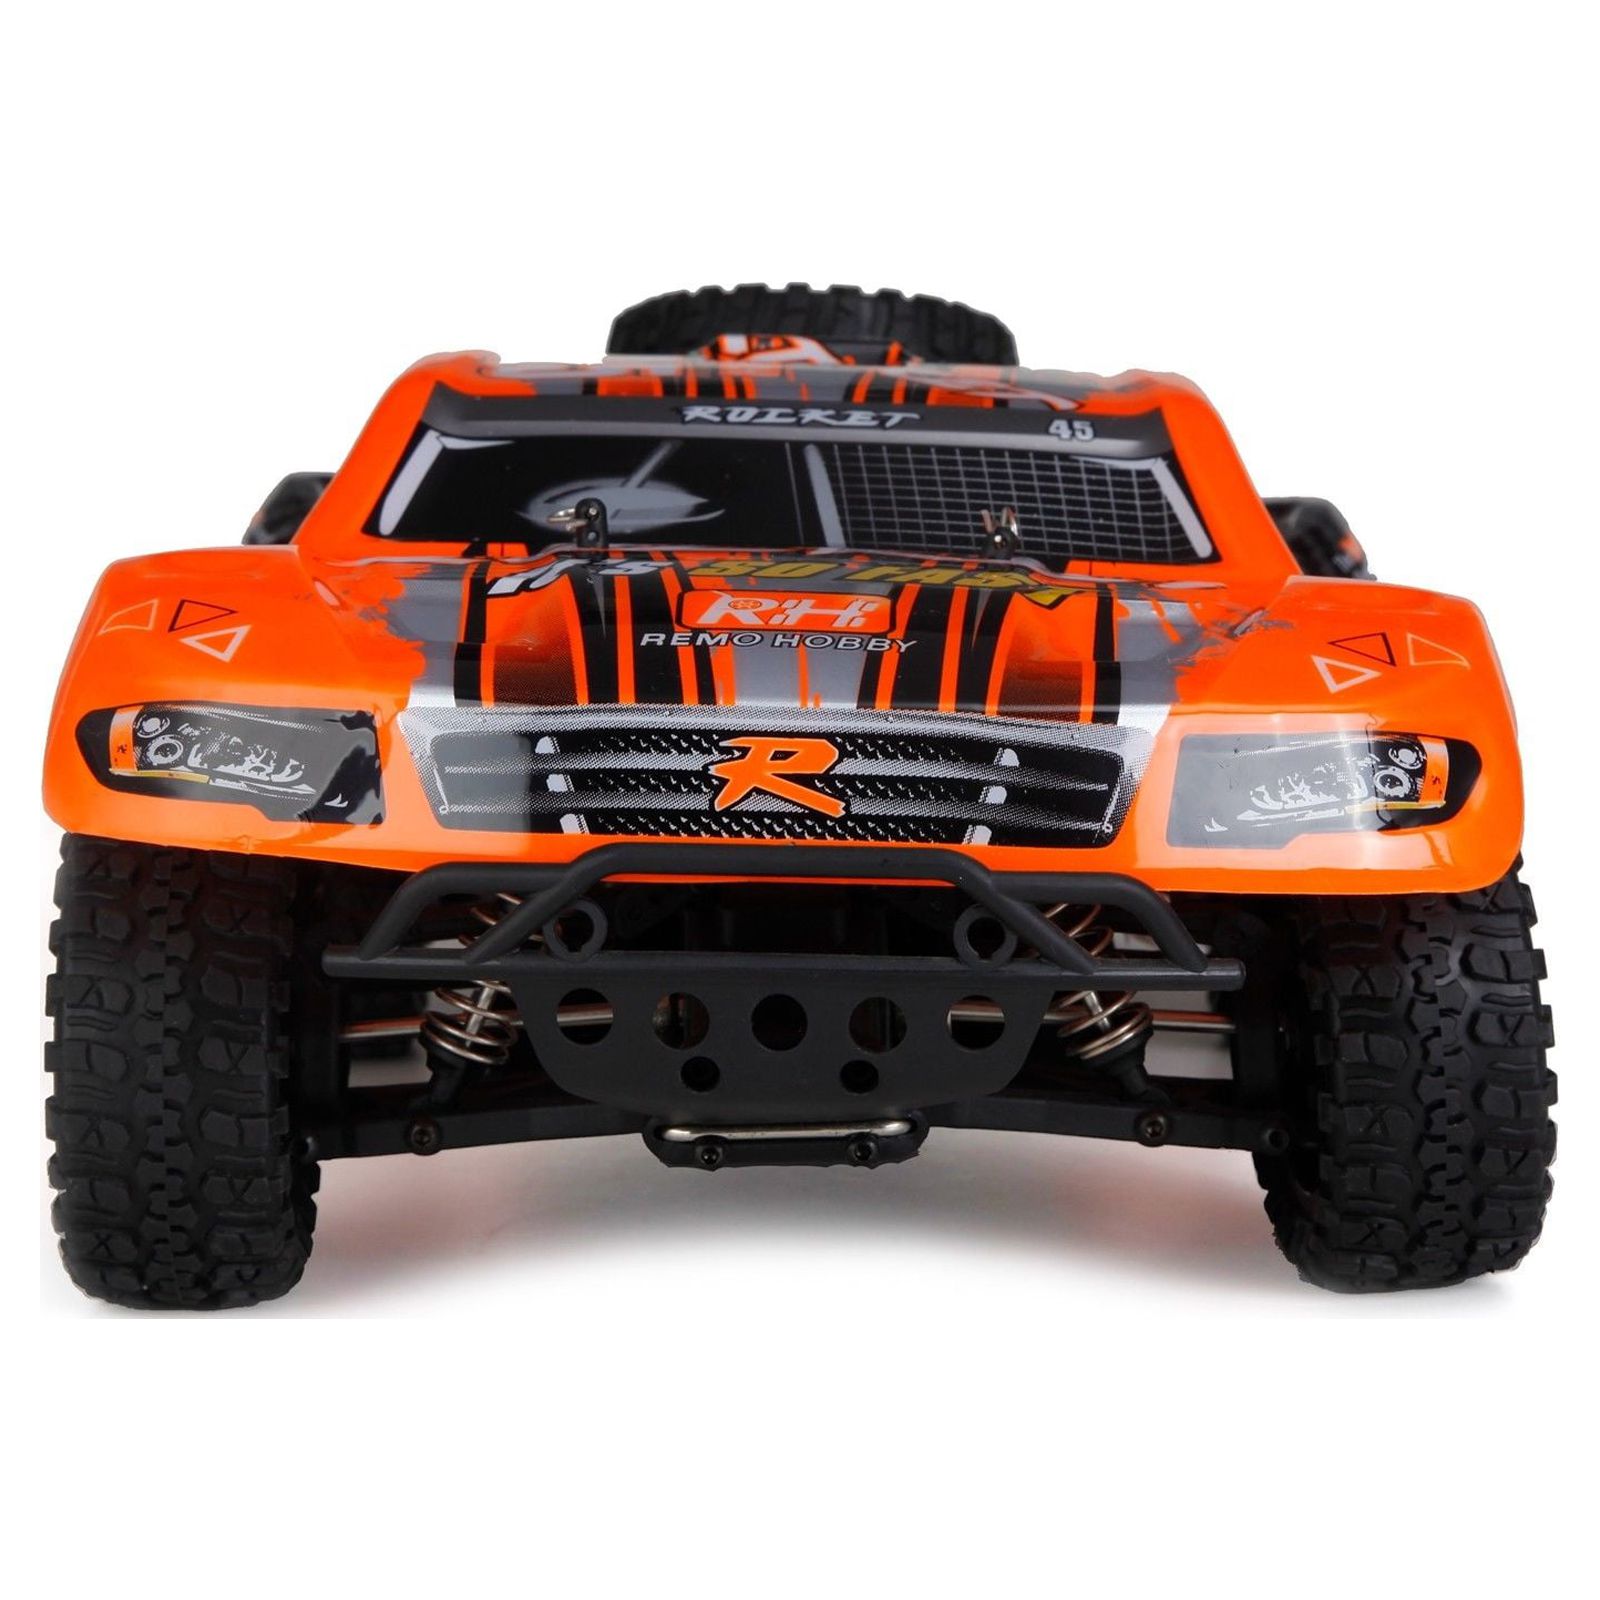 REMO 1621 2.4G 4WD 1/16 50km/h RC Truck Car Waterproof Brushed Short Course - image 5 of 7